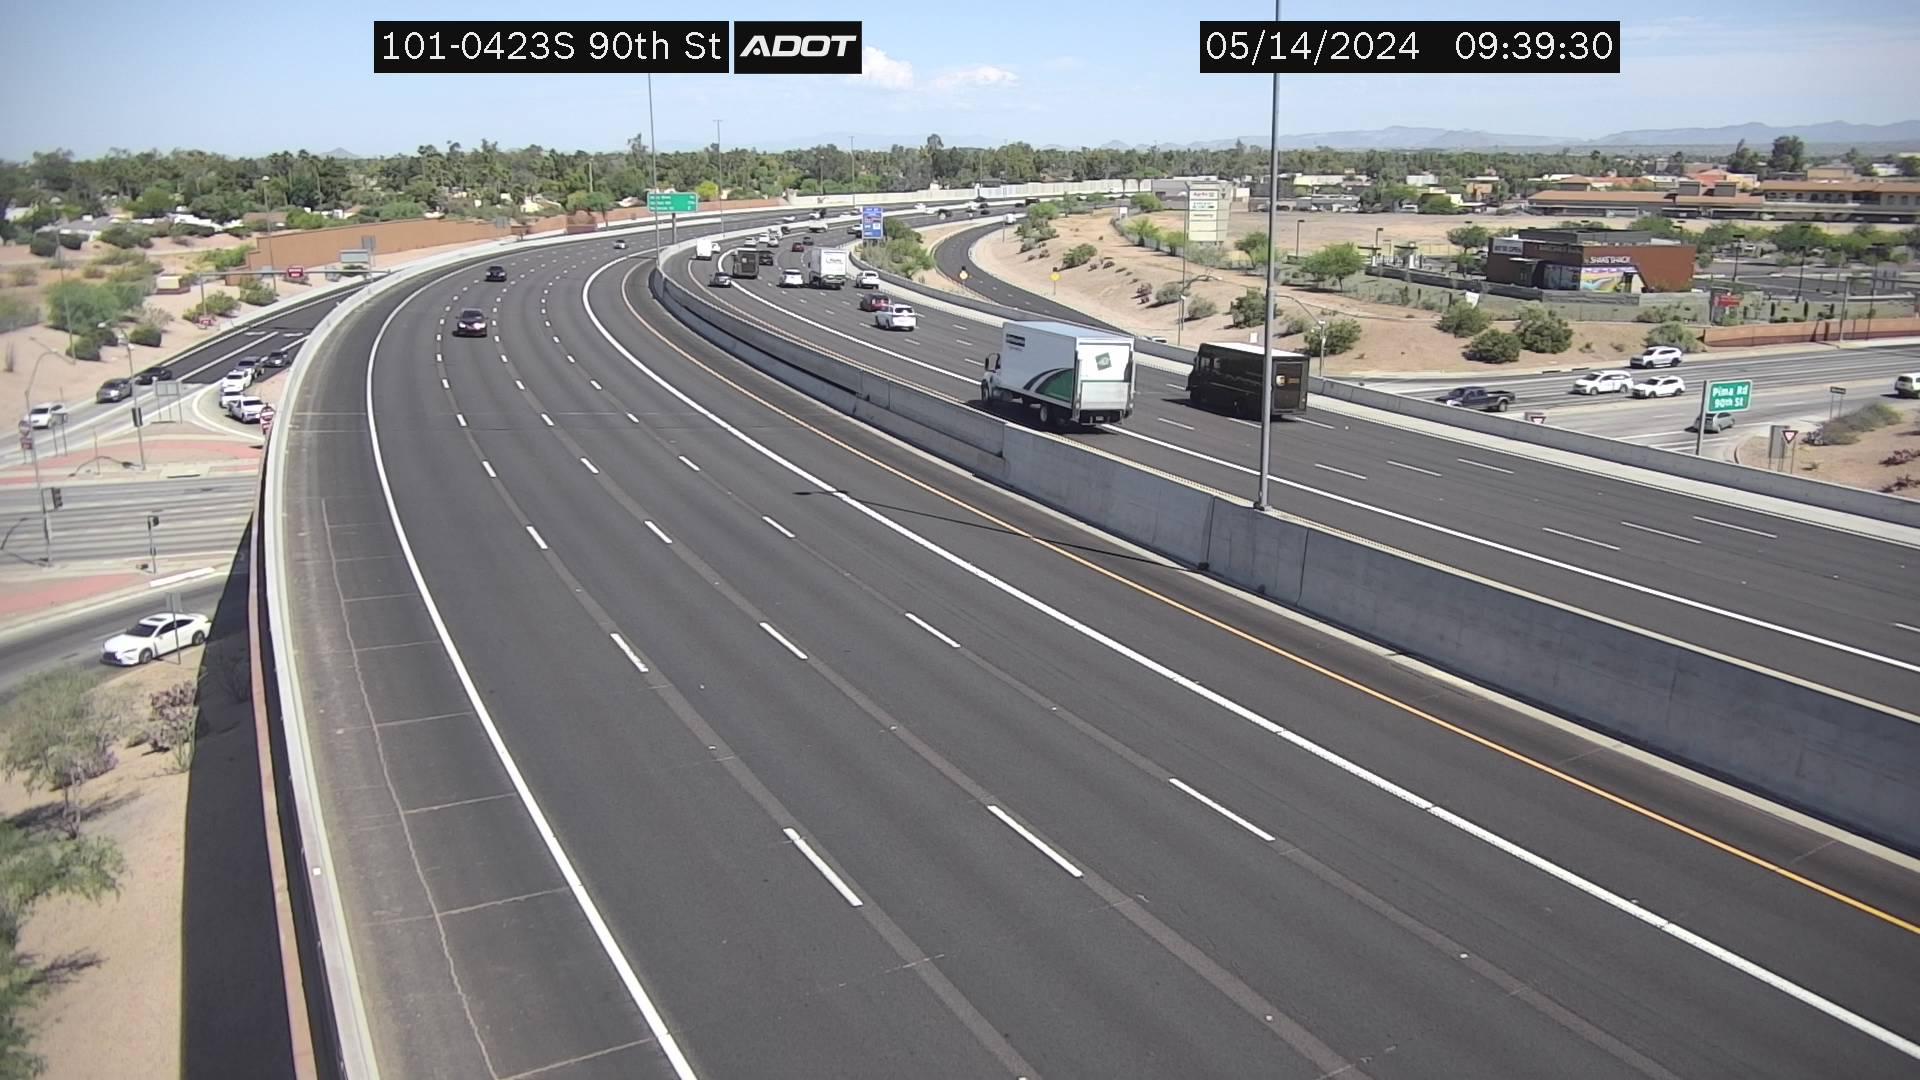 Traffic Cam Paradise Valley › South: I-101 SB 42.30 @90th St Player